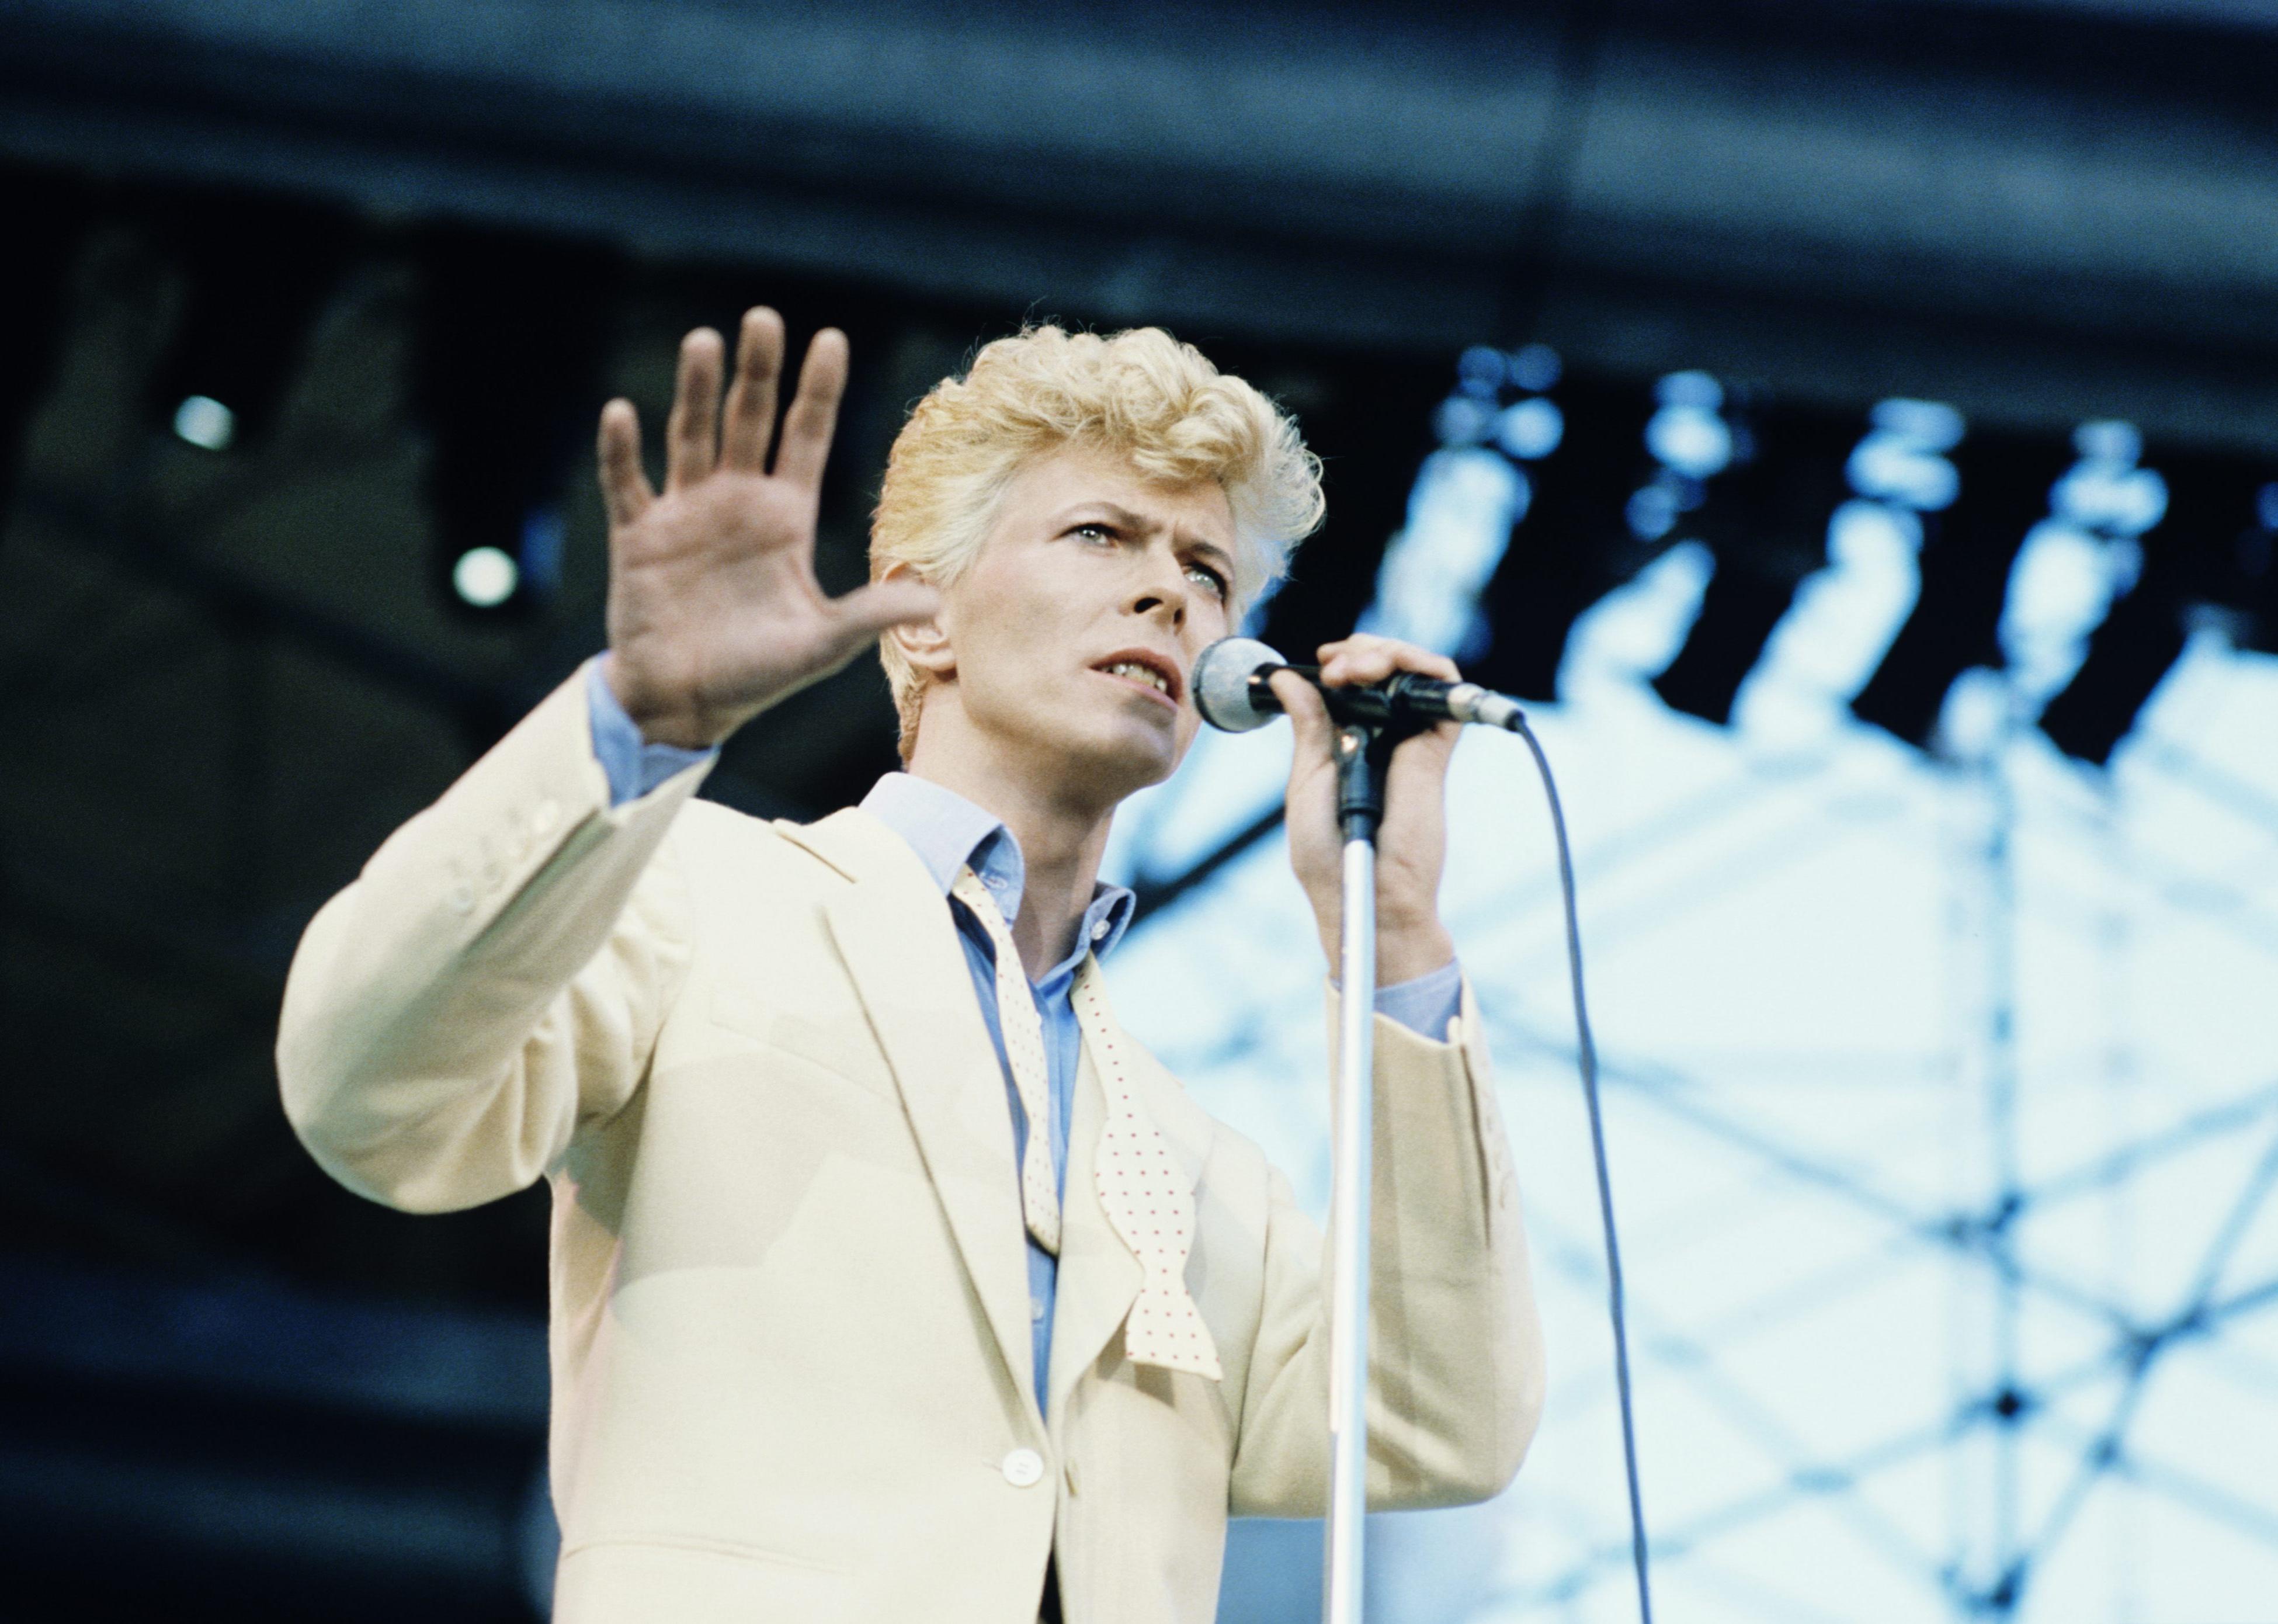 Bowie onstage in a cream colored suit jacket and undone tie.